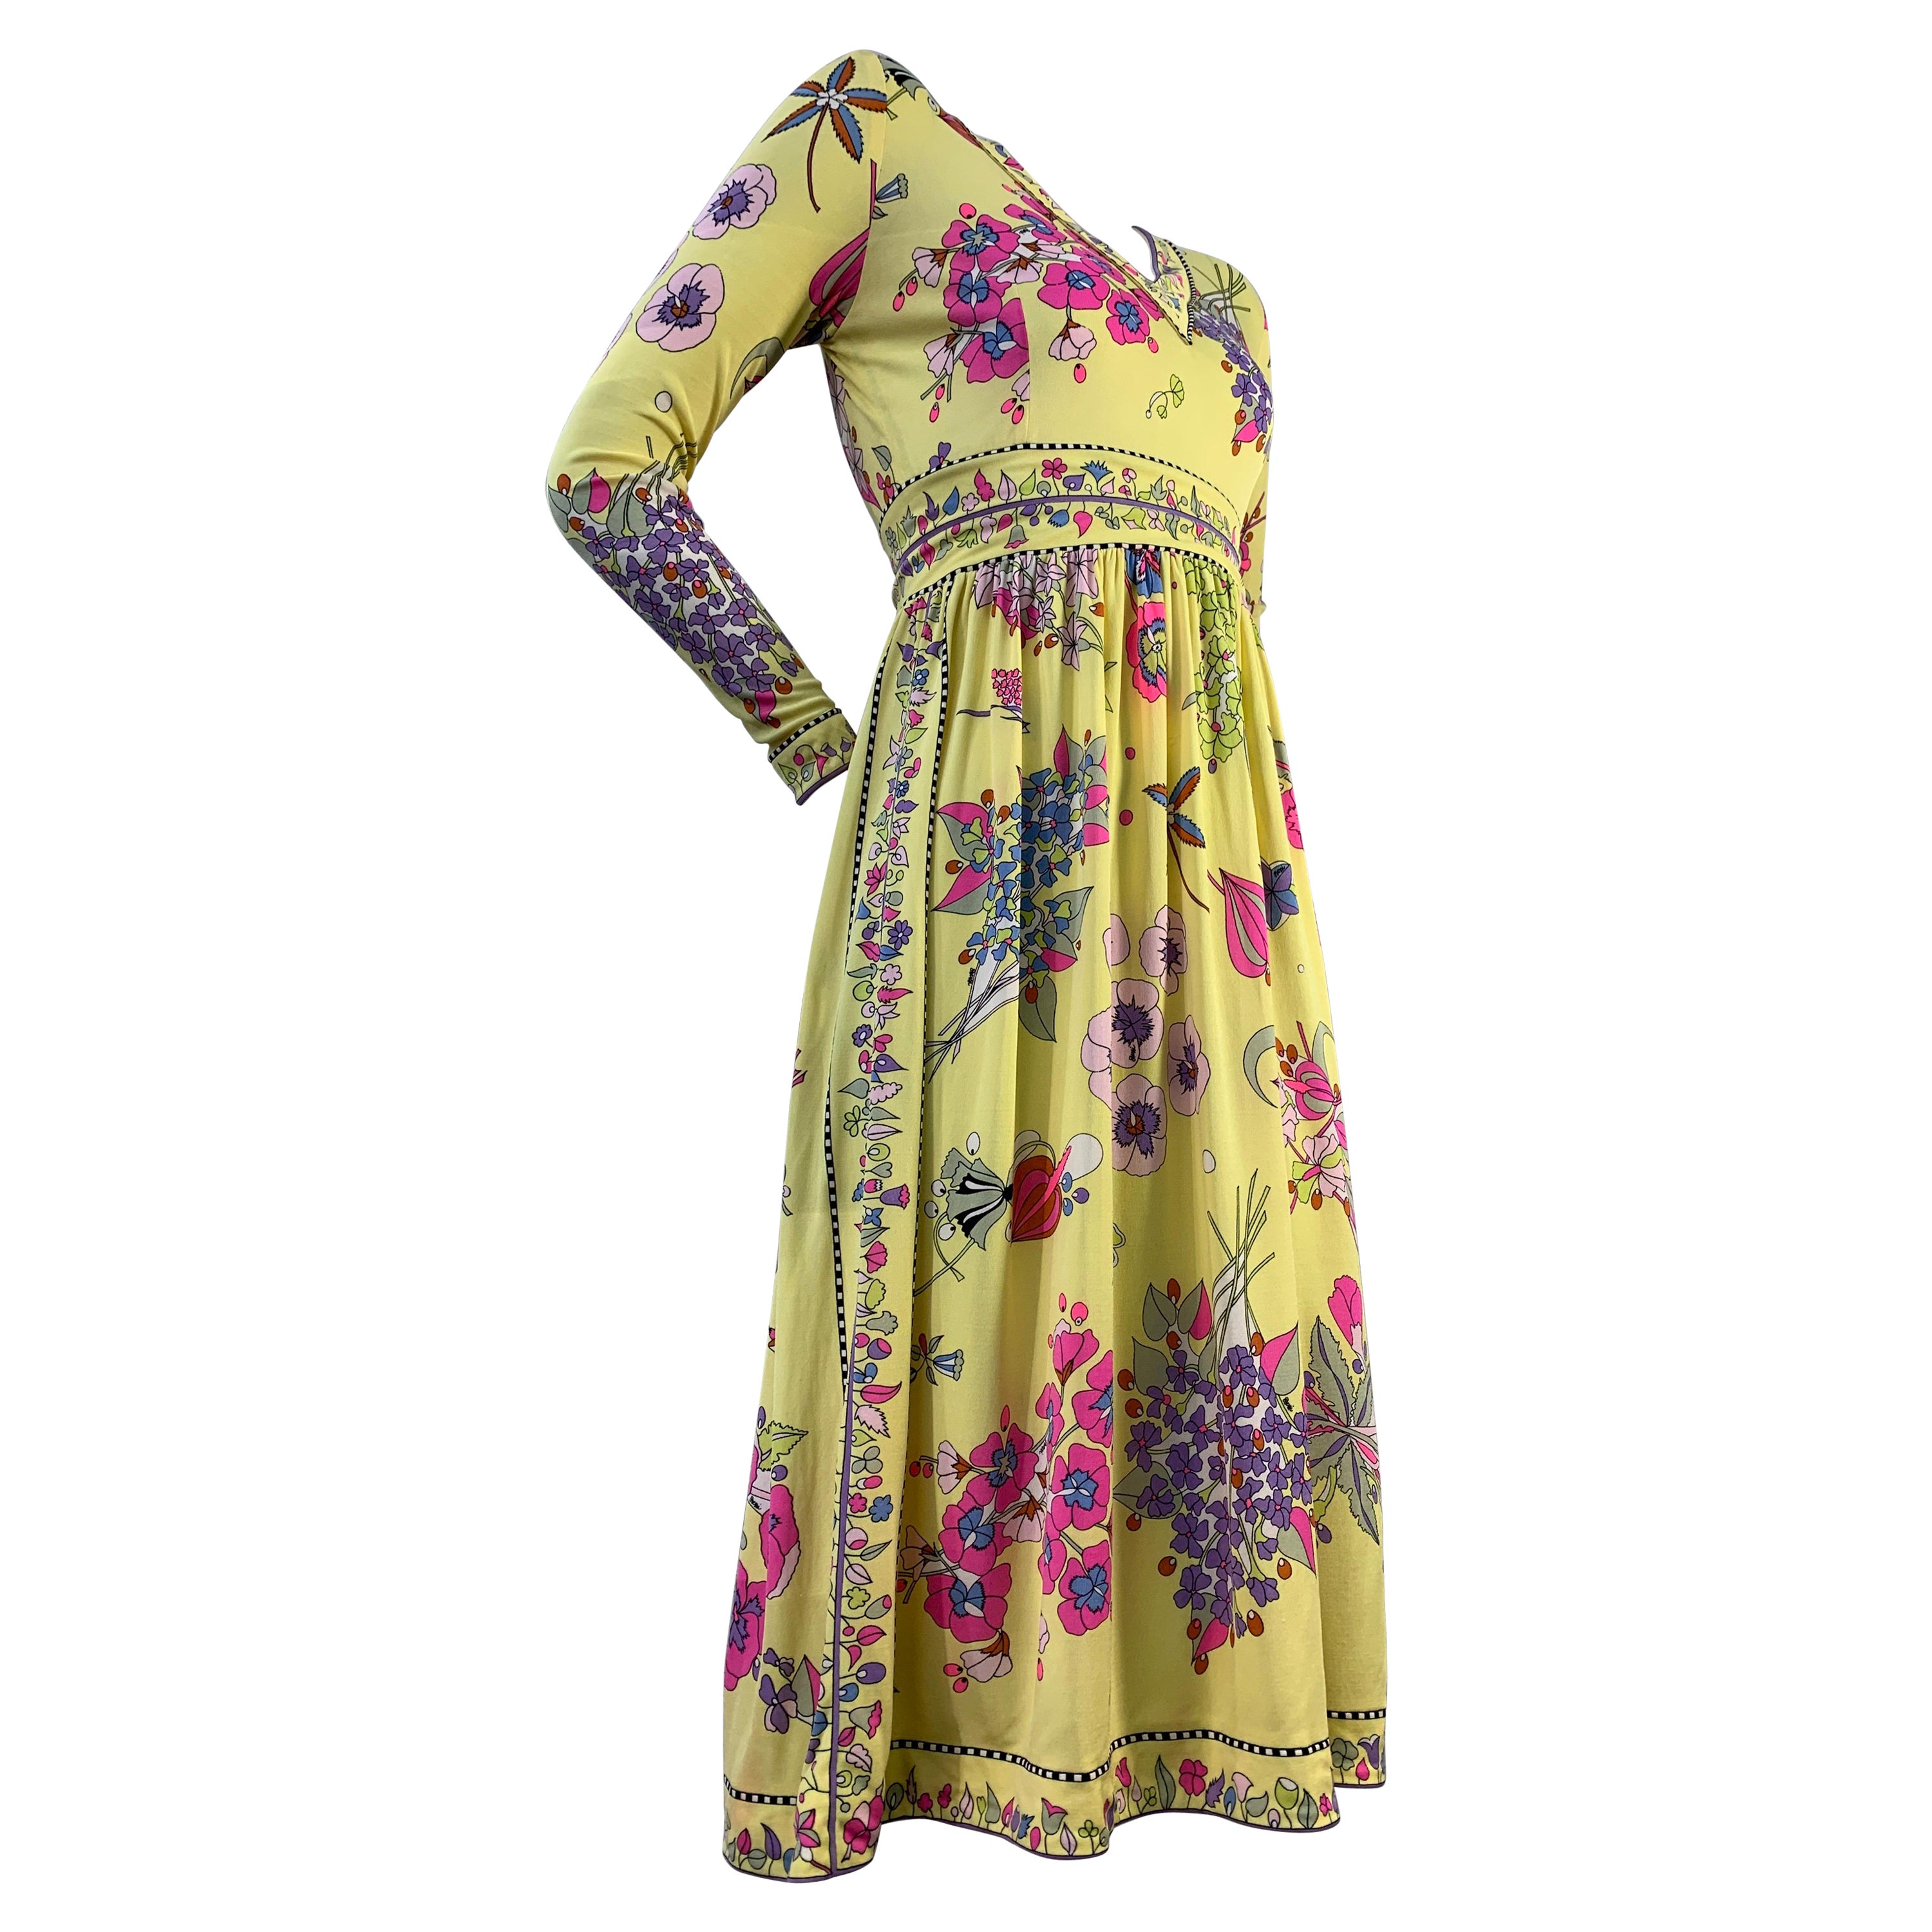 1960 Bessi Silk Jersey Psychedelic Floral Bouquet Print Mod Dress 